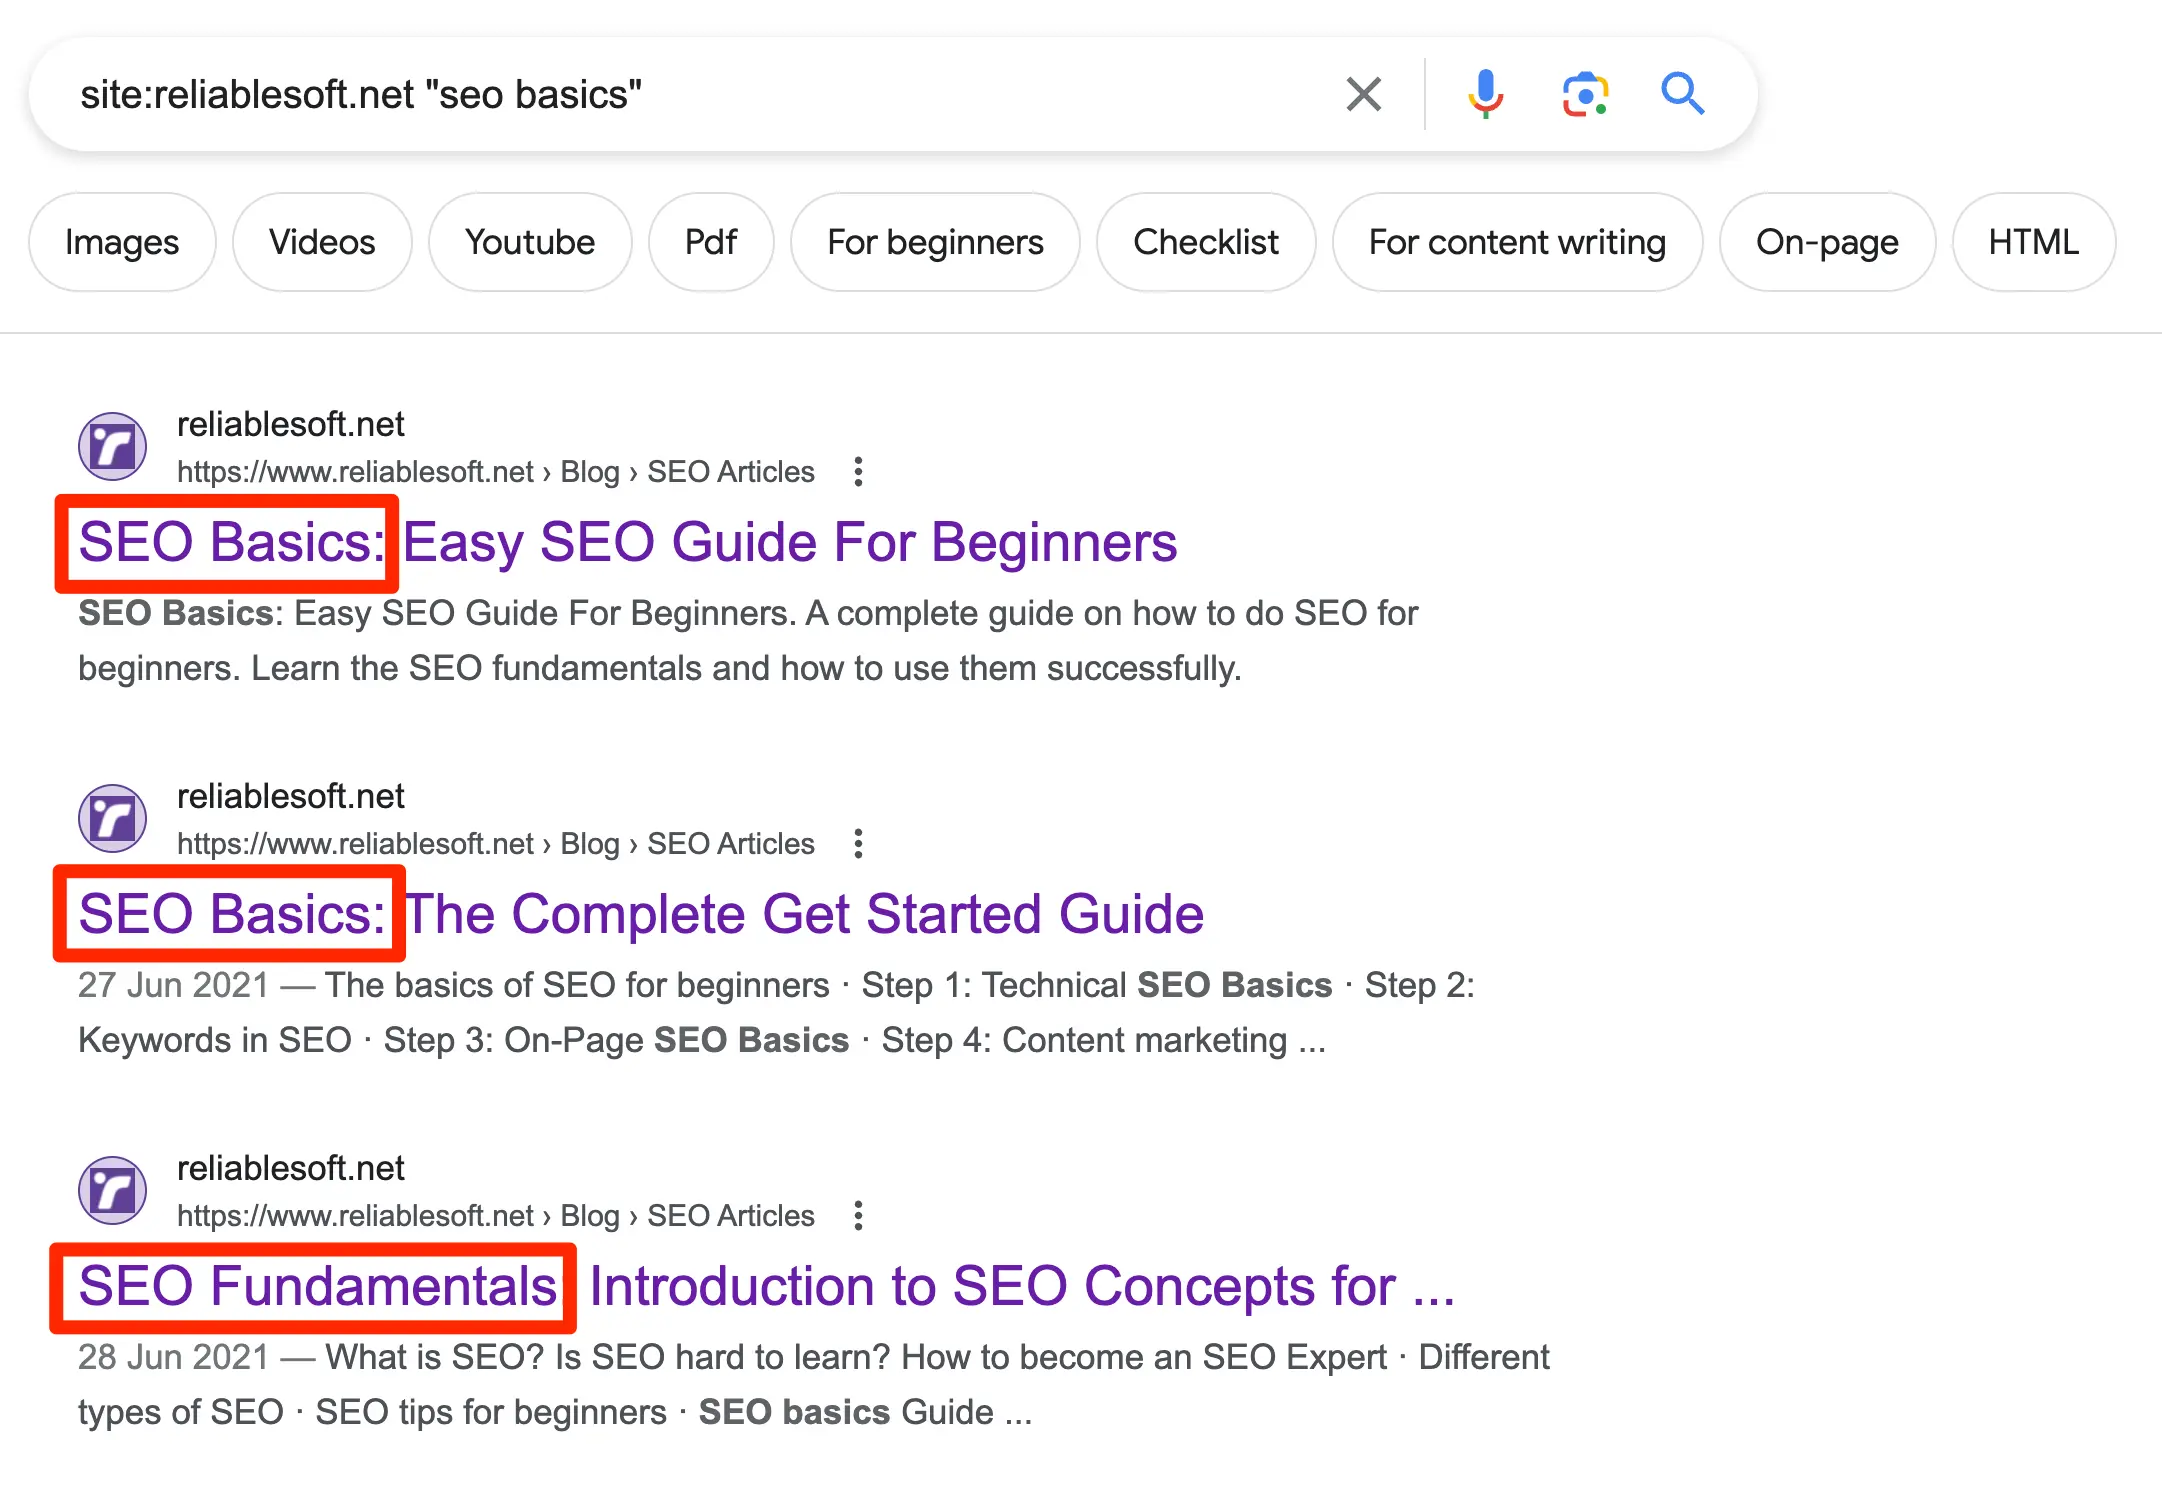 Keyword Cannibalization In Google Search Results